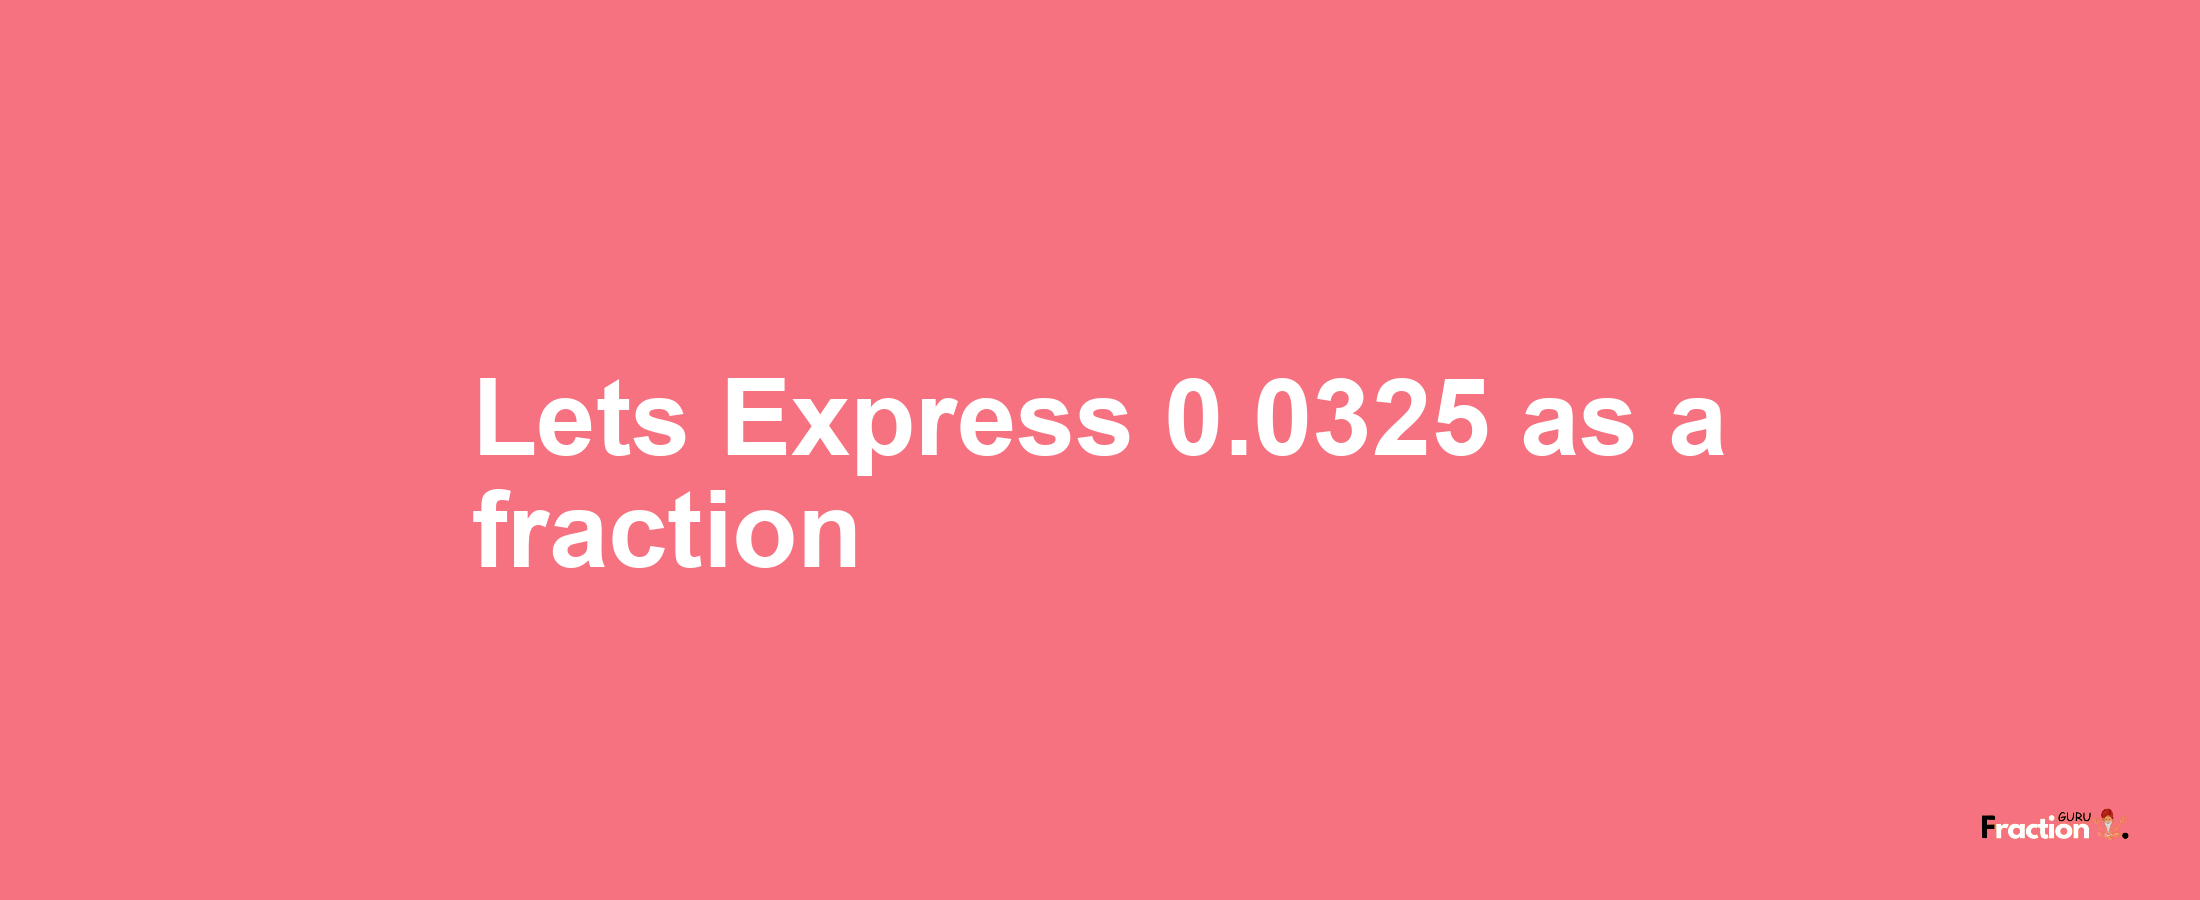 Lets Express 0.0325 as afraction